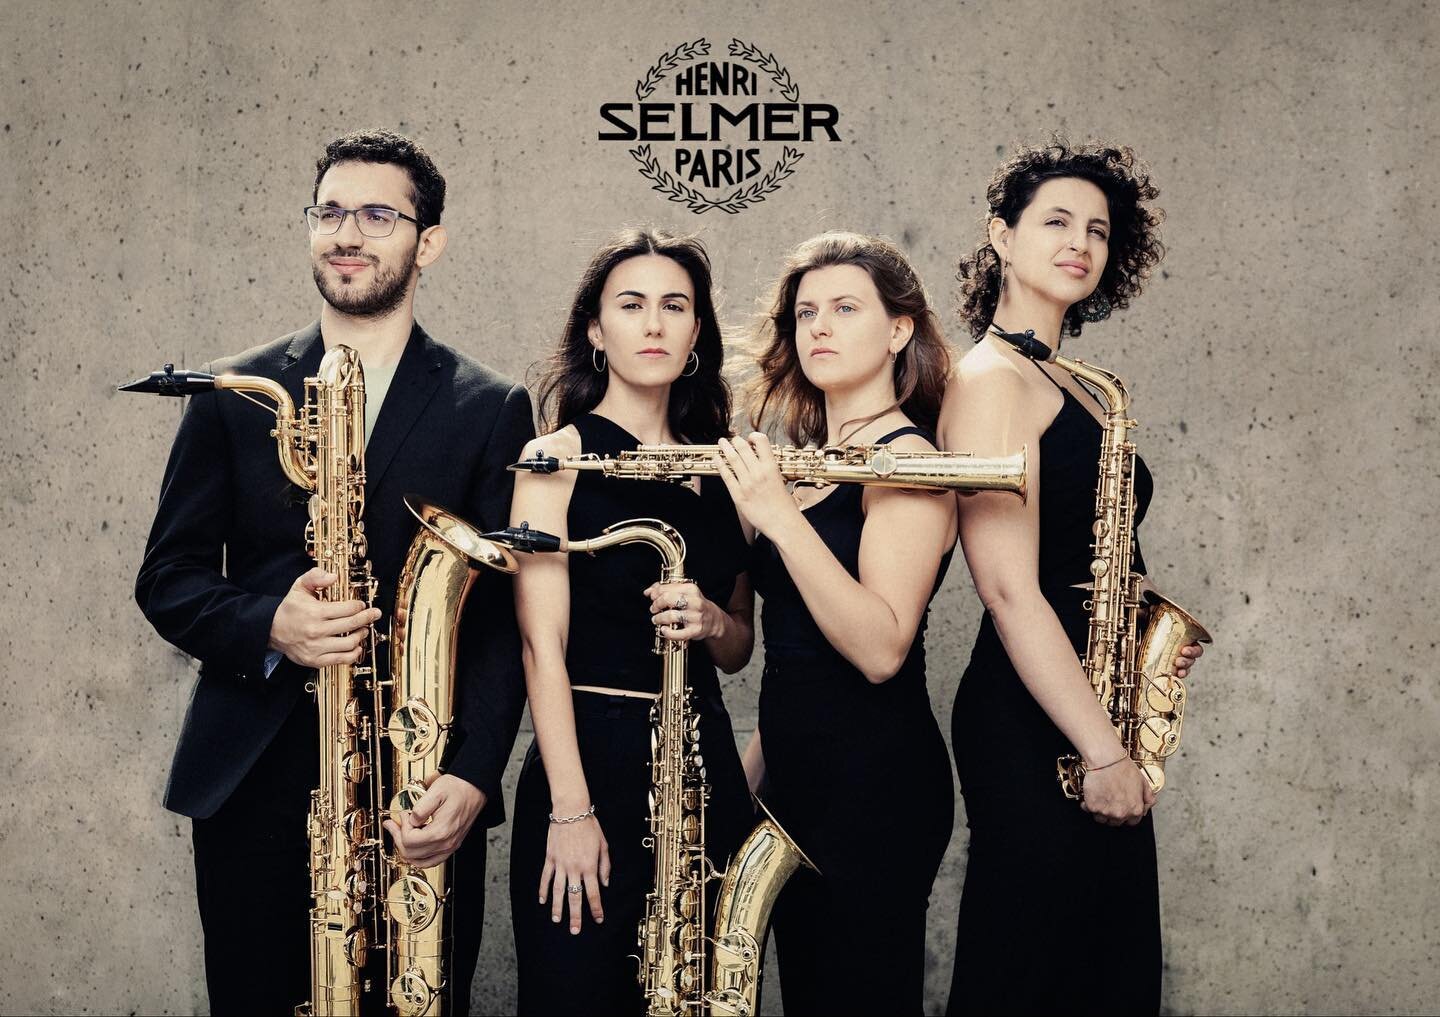 💥We are very excited to share with you that we are finally part of the Selmer family!🥰 We greatly appreciate your trust in us and hope this relationship lasts for many years!🤩

💥Estamos muy contentas de compartir con vosotros que por fin somos pa